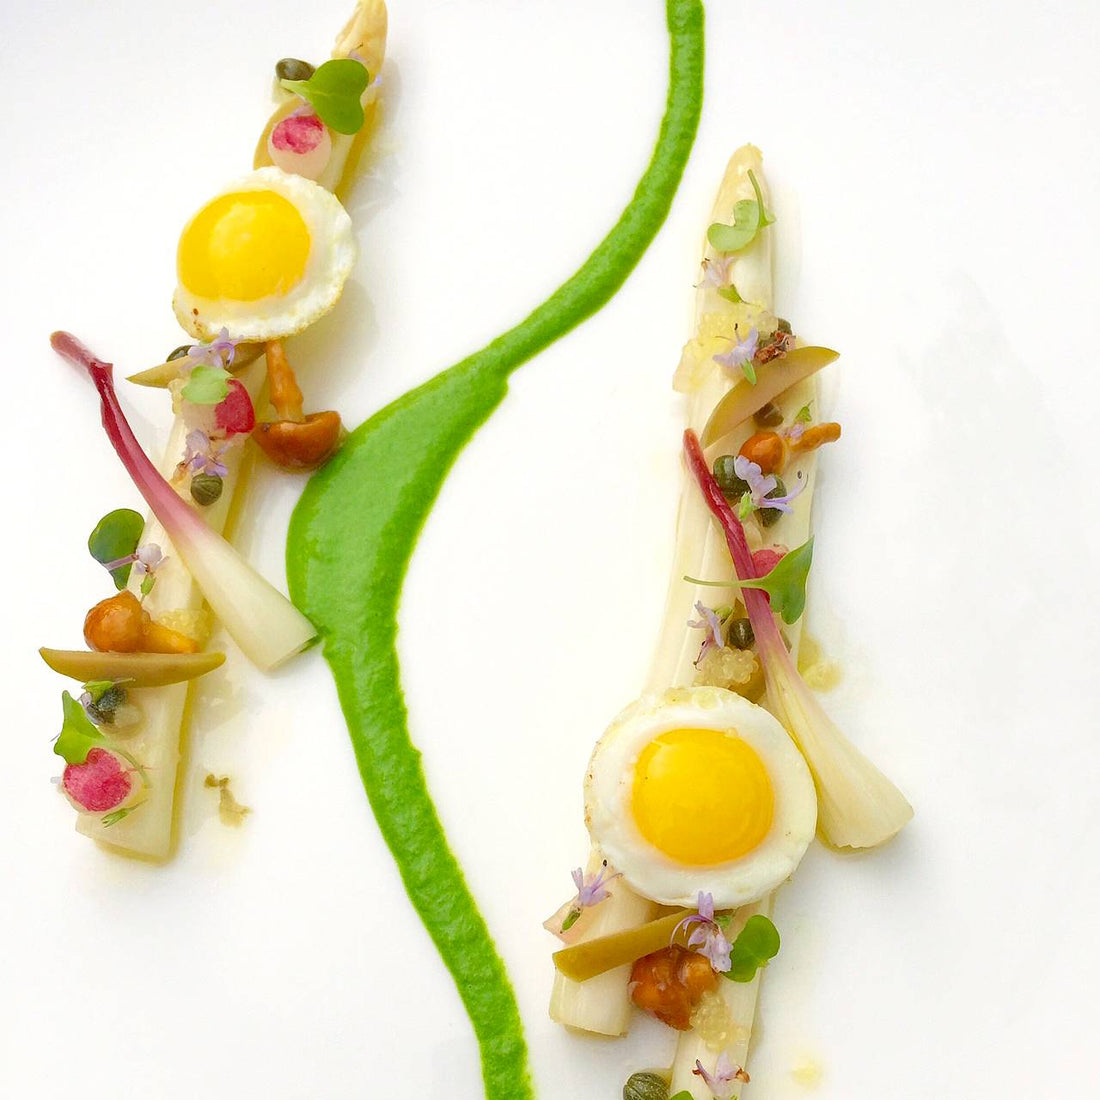 White Asparagus Escabeche with Quail Egg and Ramps